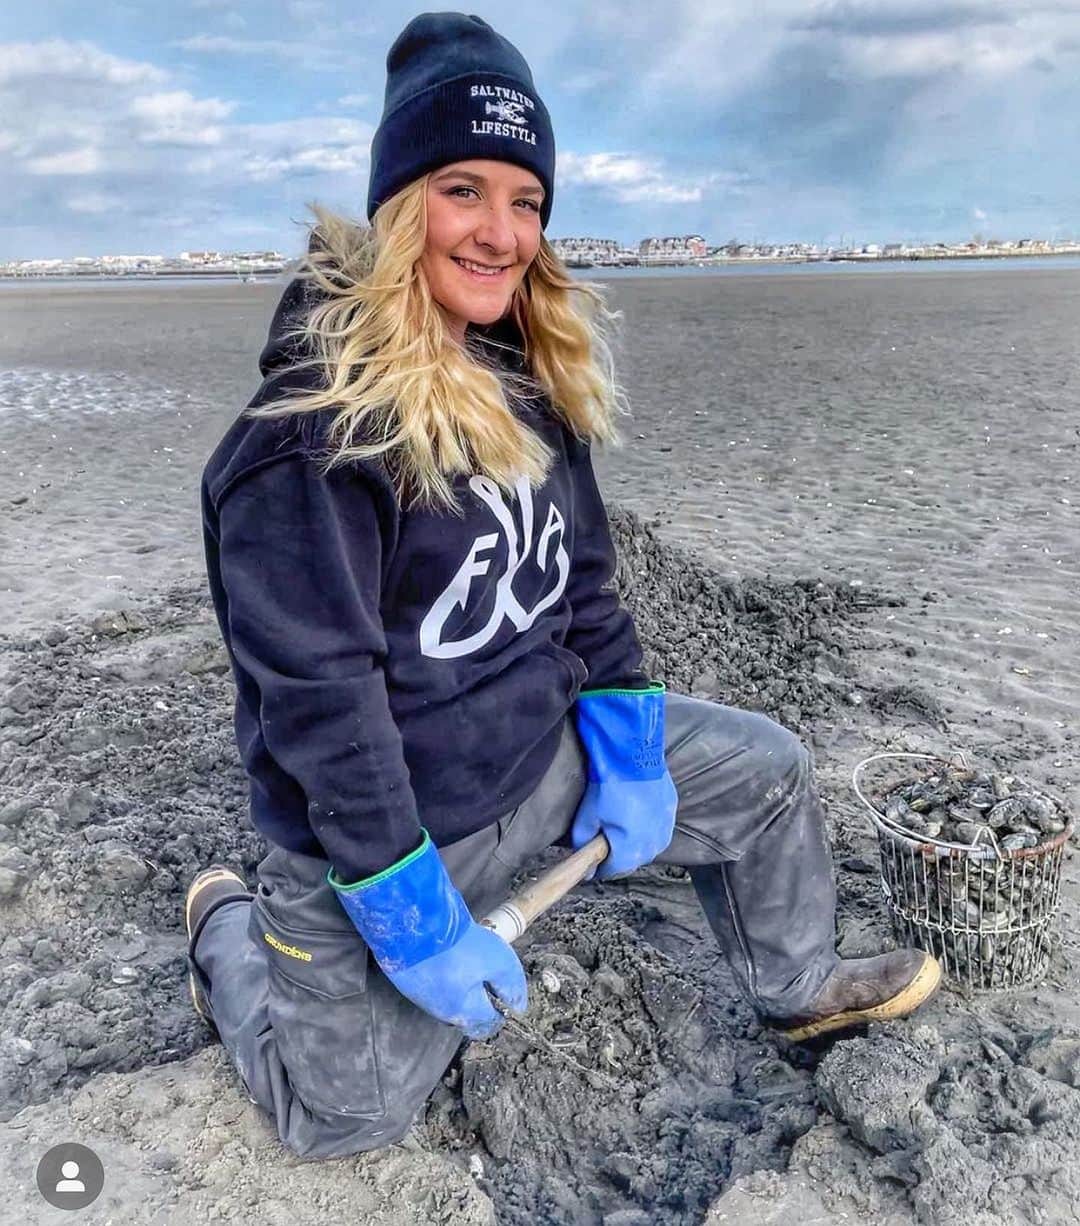 Filthy Anglers™のインスタグラム：「Filthy Female Friday my friends! How many folks go clamming, it’s fishing! Check out this photo by @thevikingdiver of @thatsaltyblonde_ from NH putting in a hard days work. She is an avid angler and does this for a living, very knowledgeable on anything ocean as well! Congrats guys and gals you are Certified Filthy www.filthyanglers.com #fishing #clamming #ovean #newengland #boating #filthyanglers #icefishing #hunting #outdoors #hunt #girlswhofish」